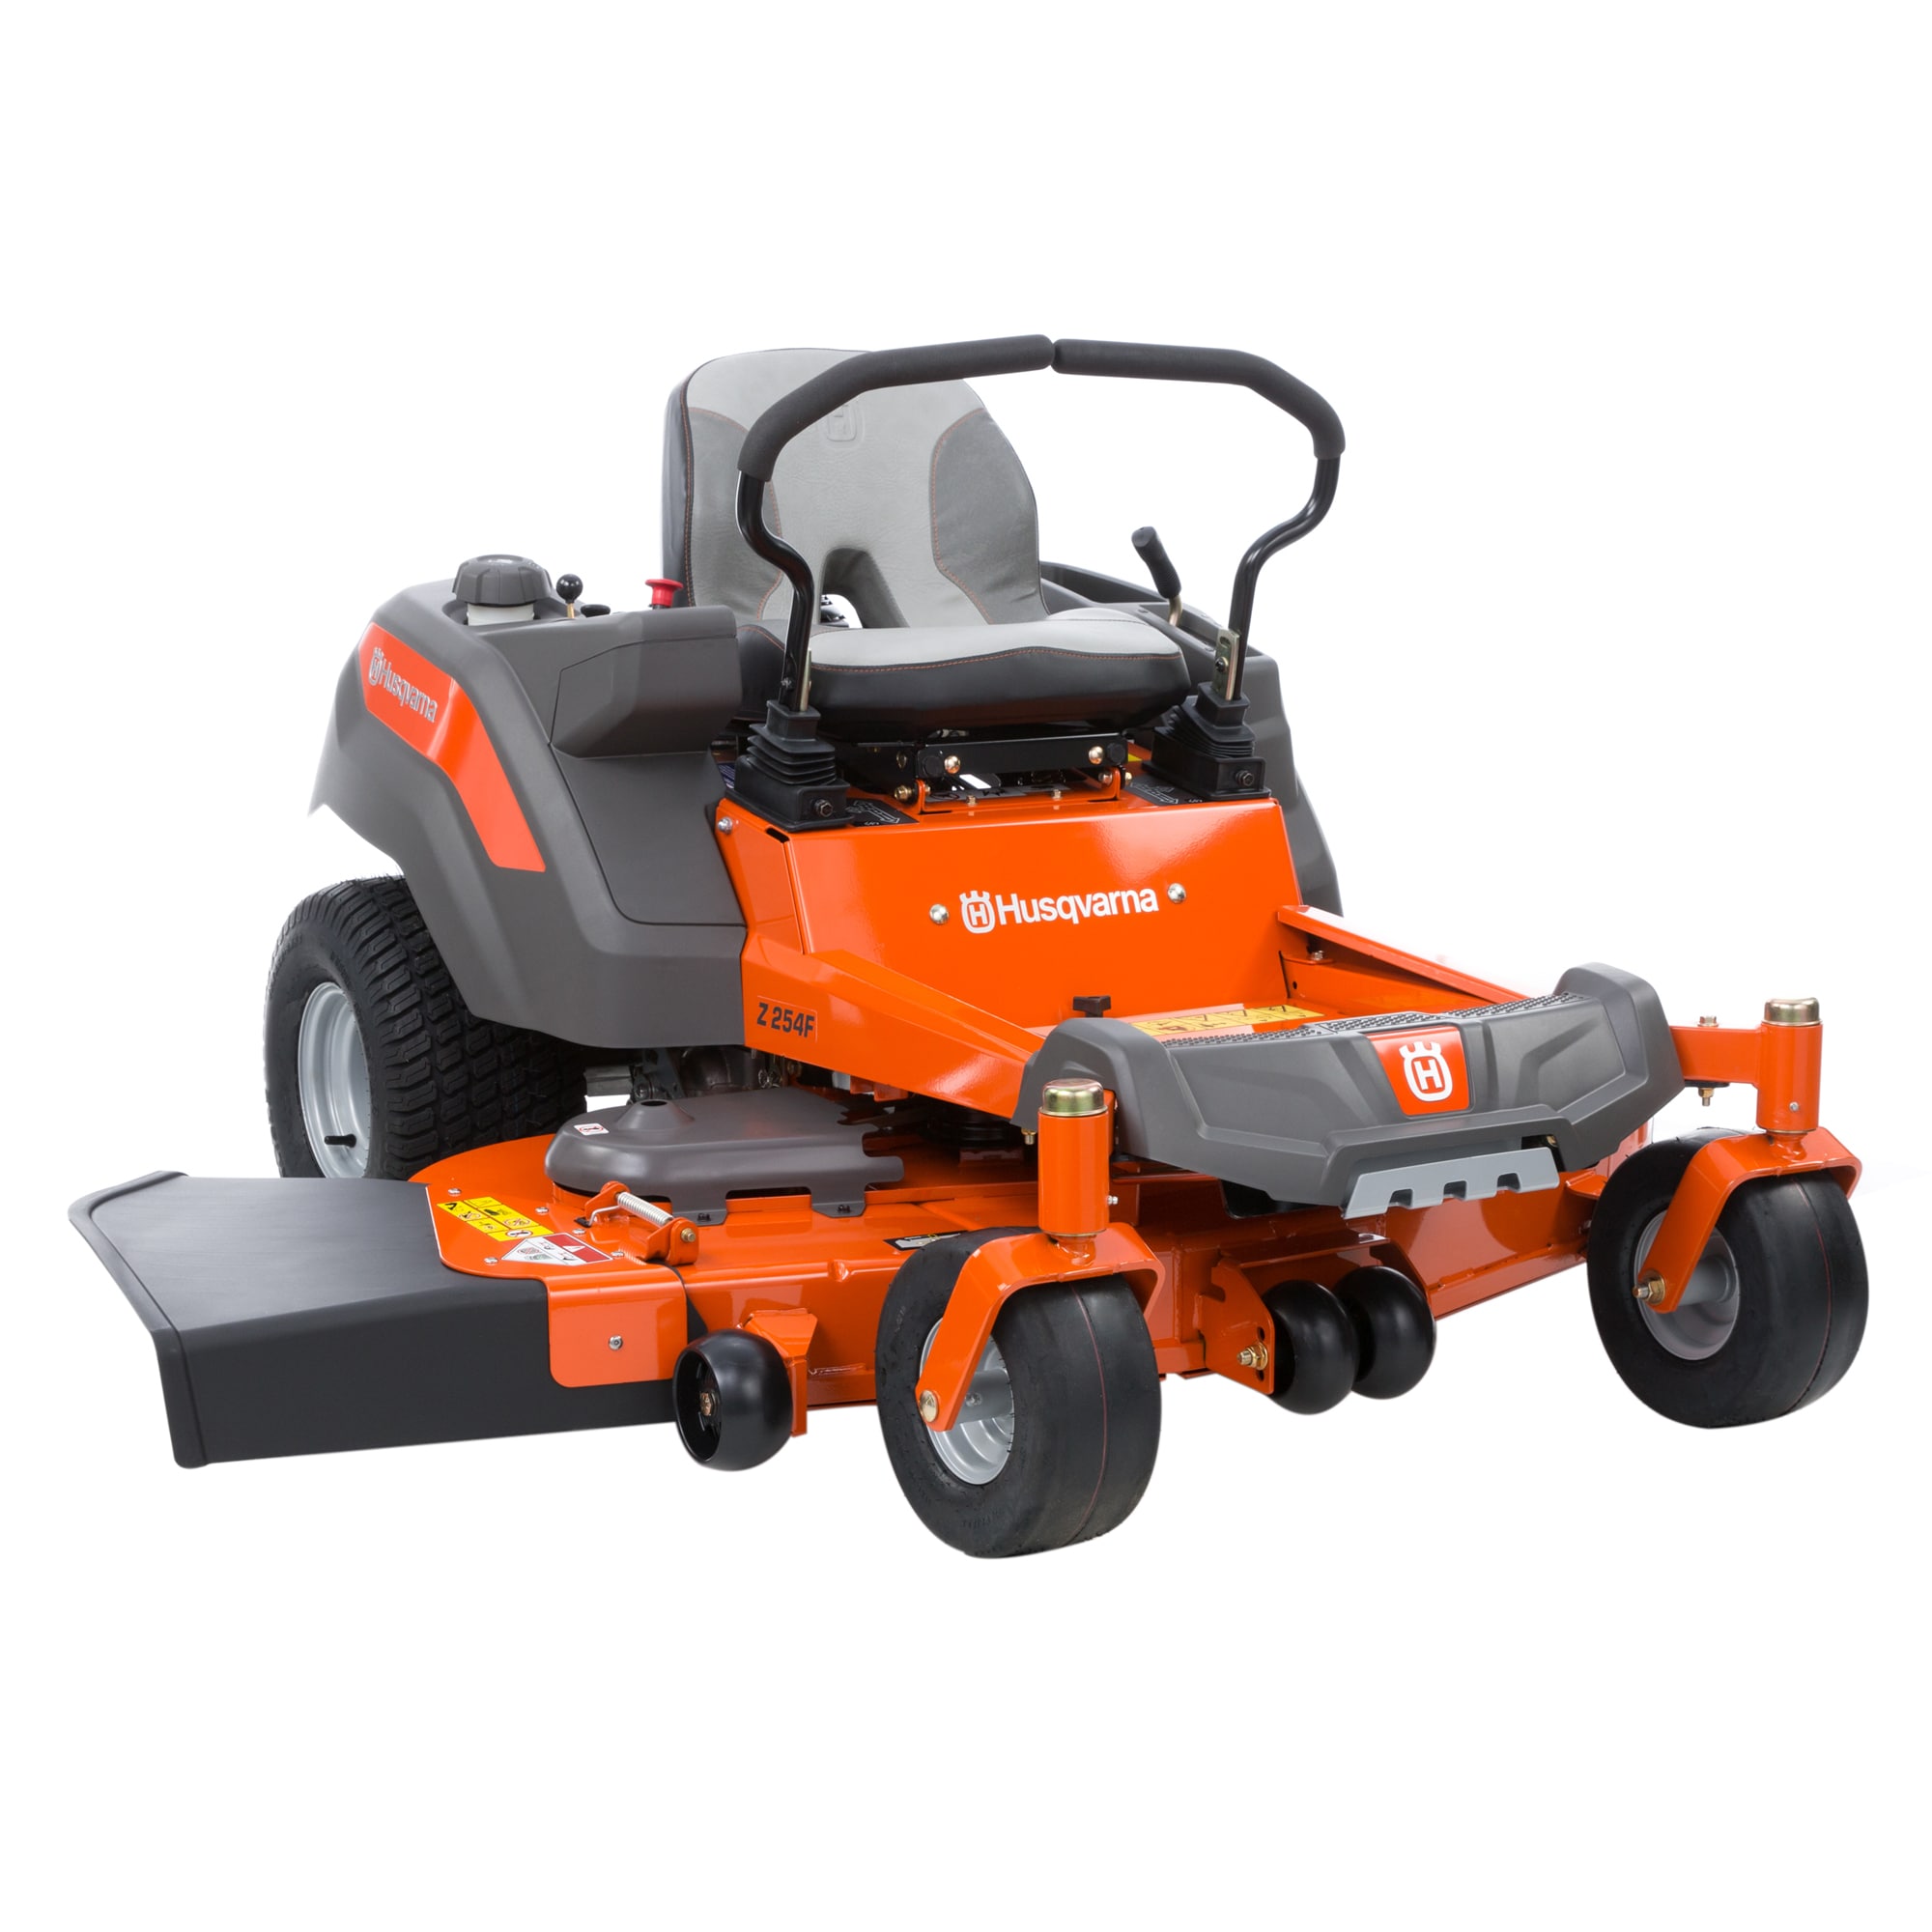 Lawn Mower With Mulching Capability